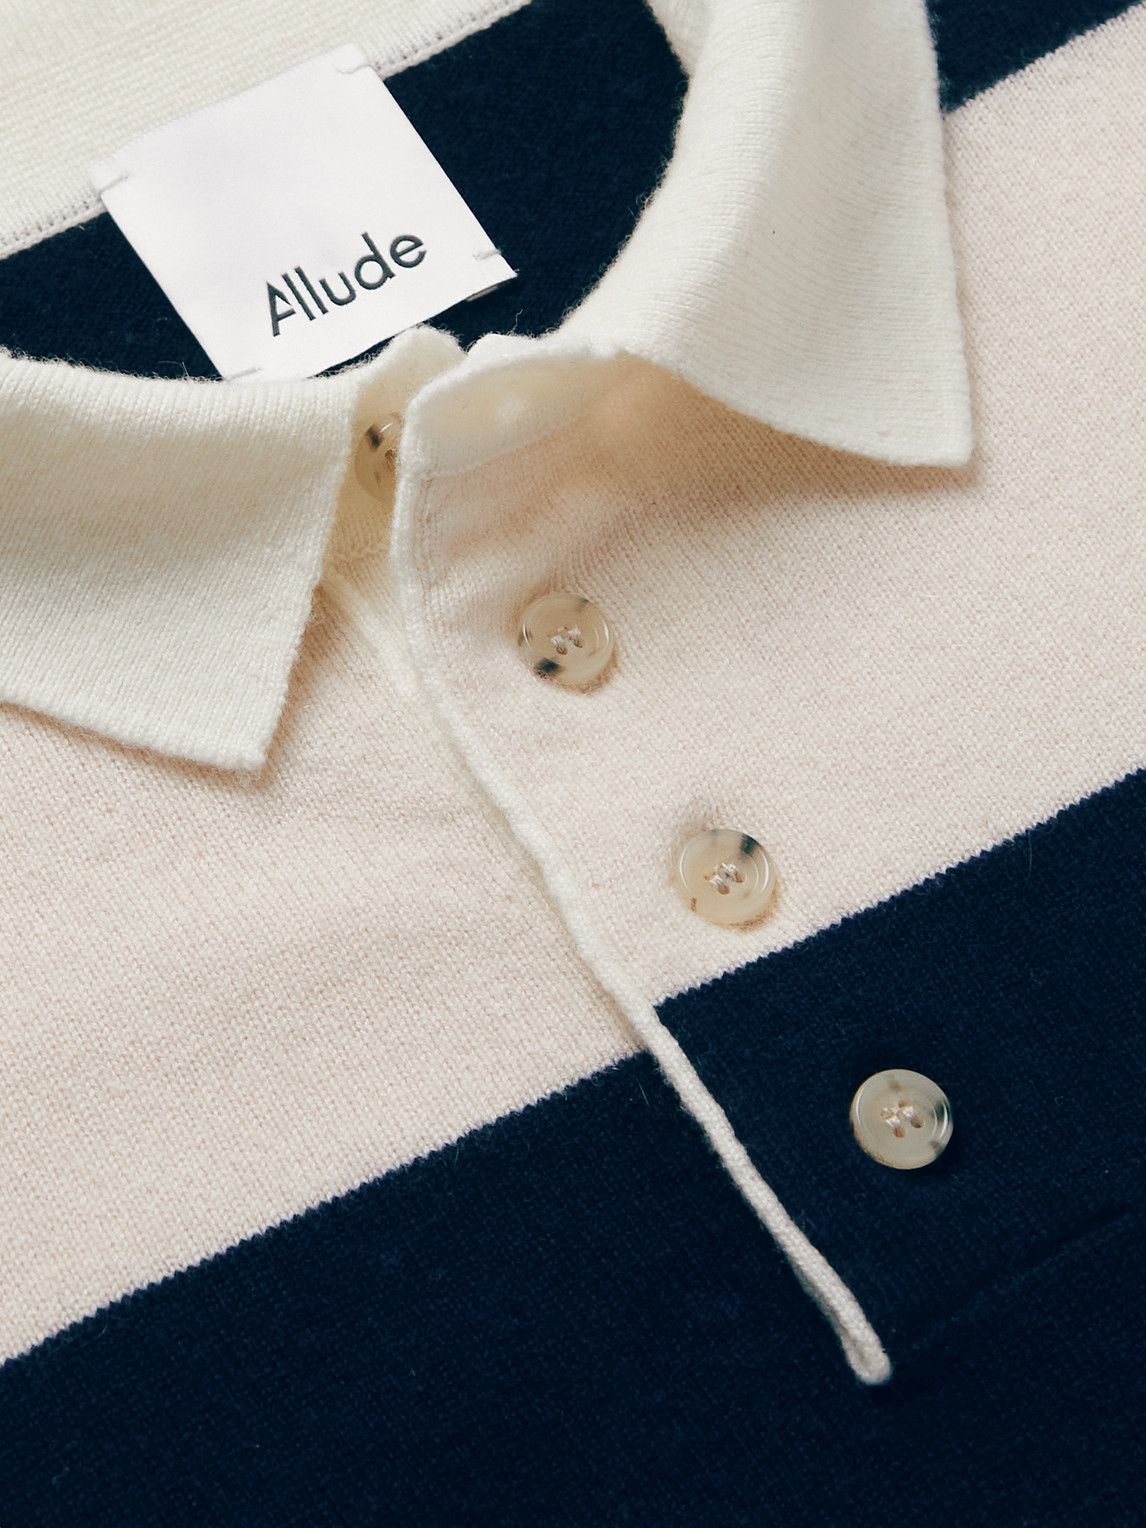 Allude - Striped Virgin Wool and Cashmere-Blend Polo Shirt - Neutrals